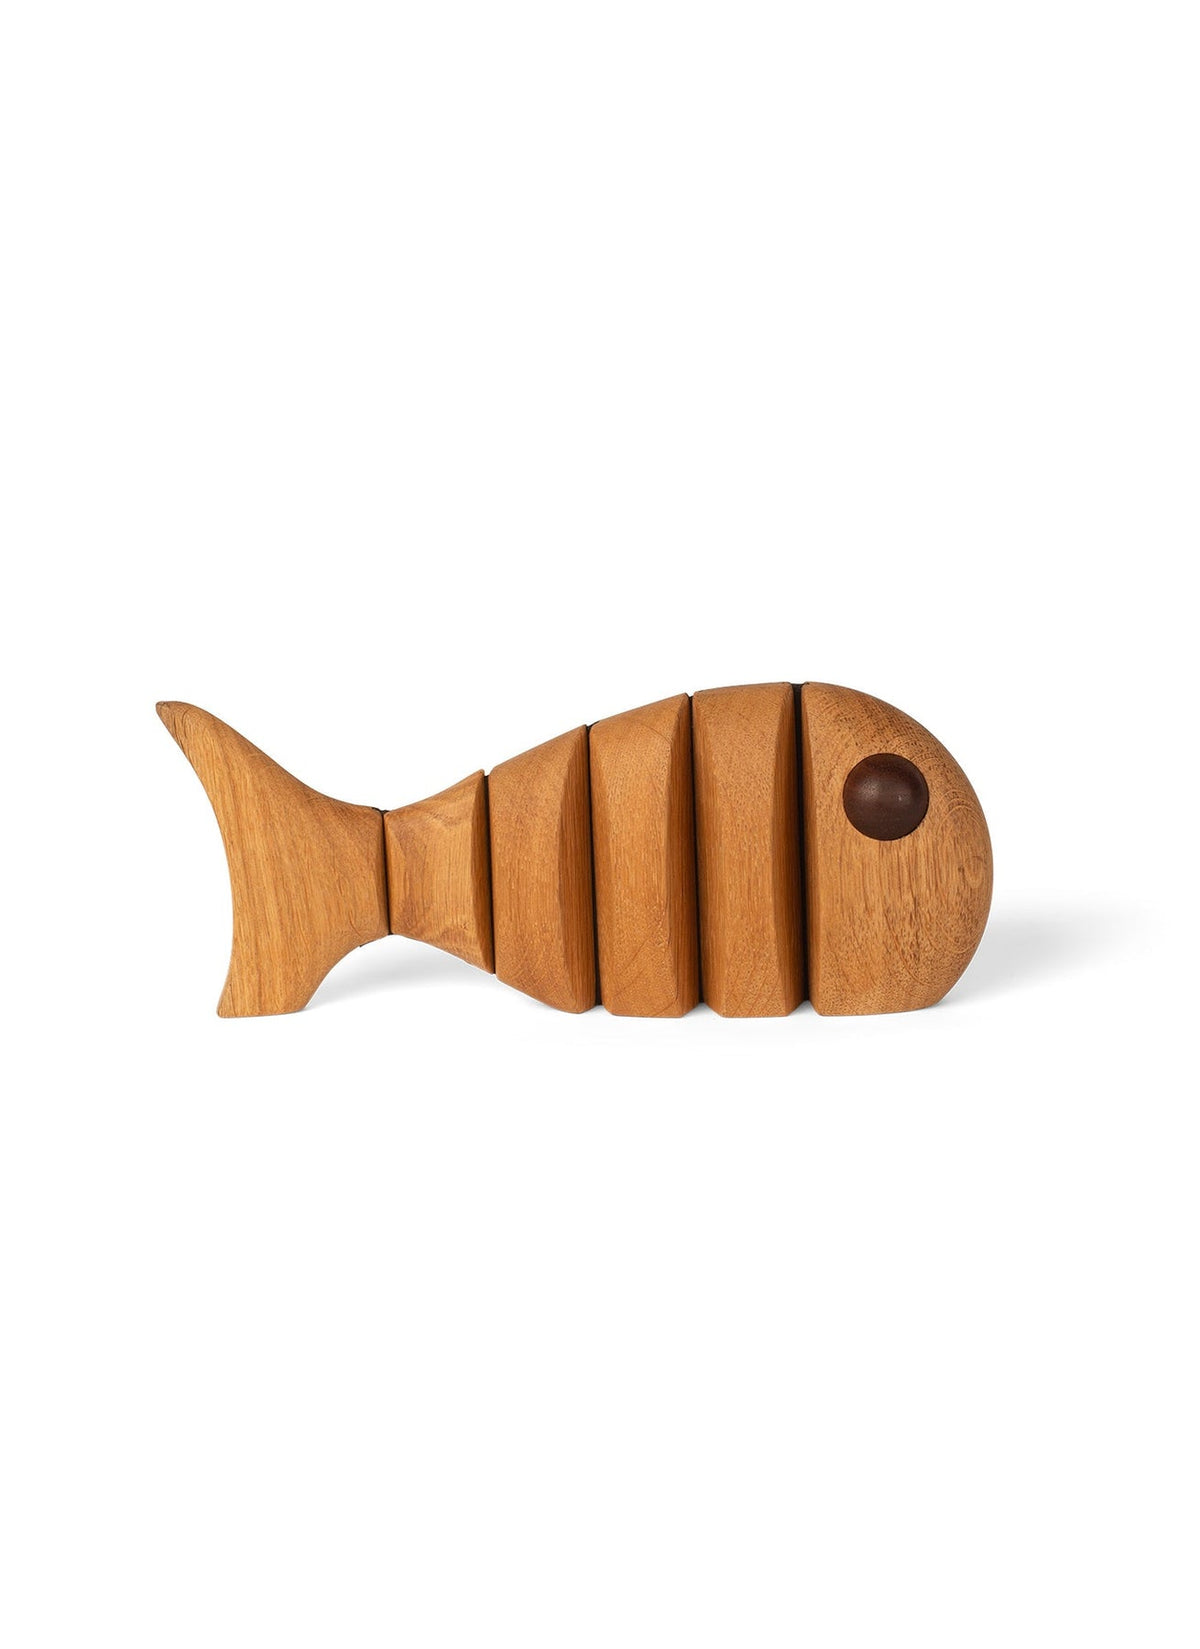 The Wood Fish by Spring Copenhagen